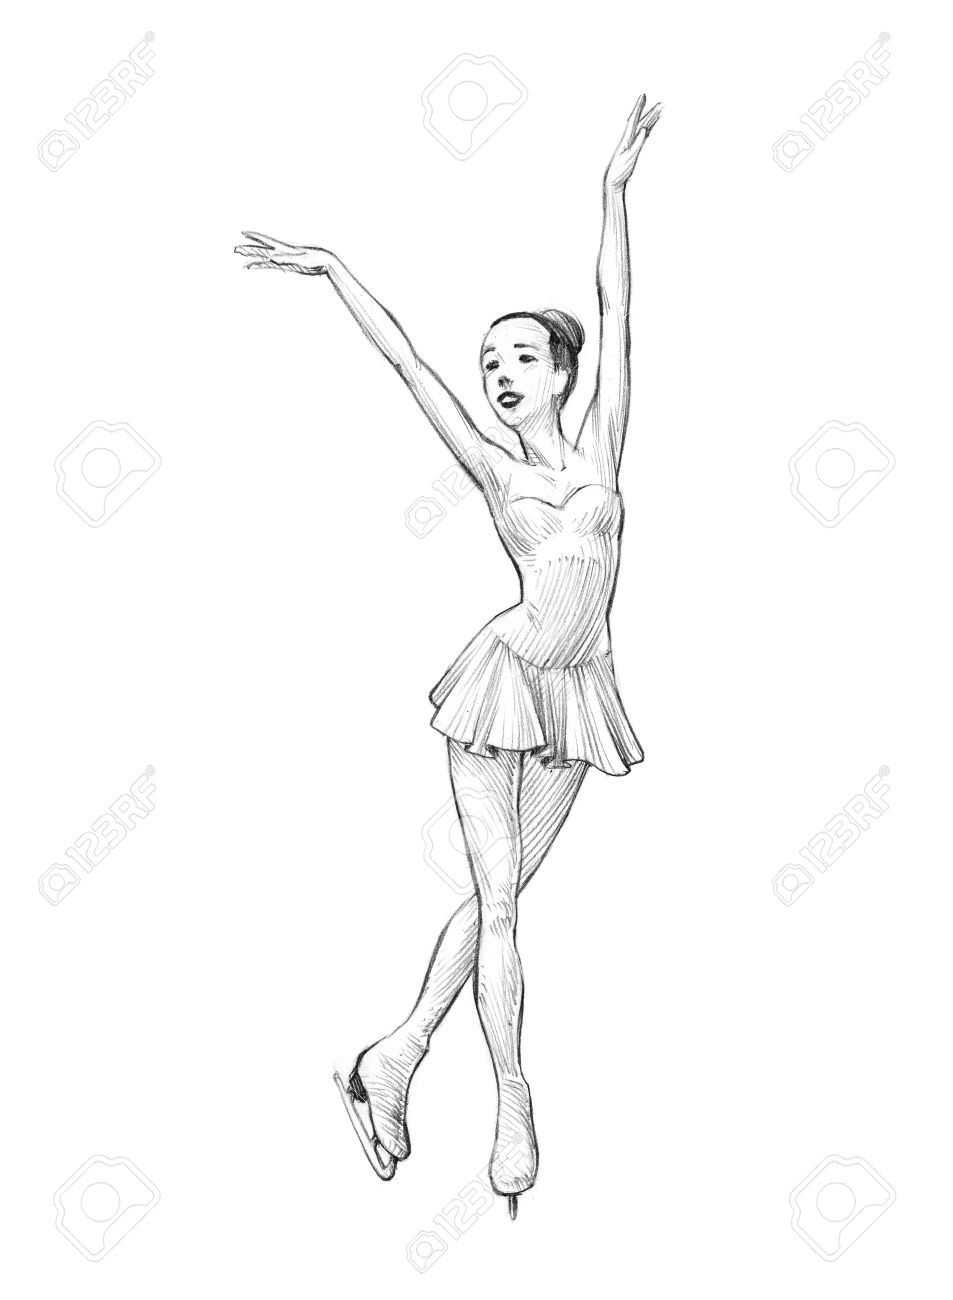 Ice Skater Drawing at GetDrawings Free download